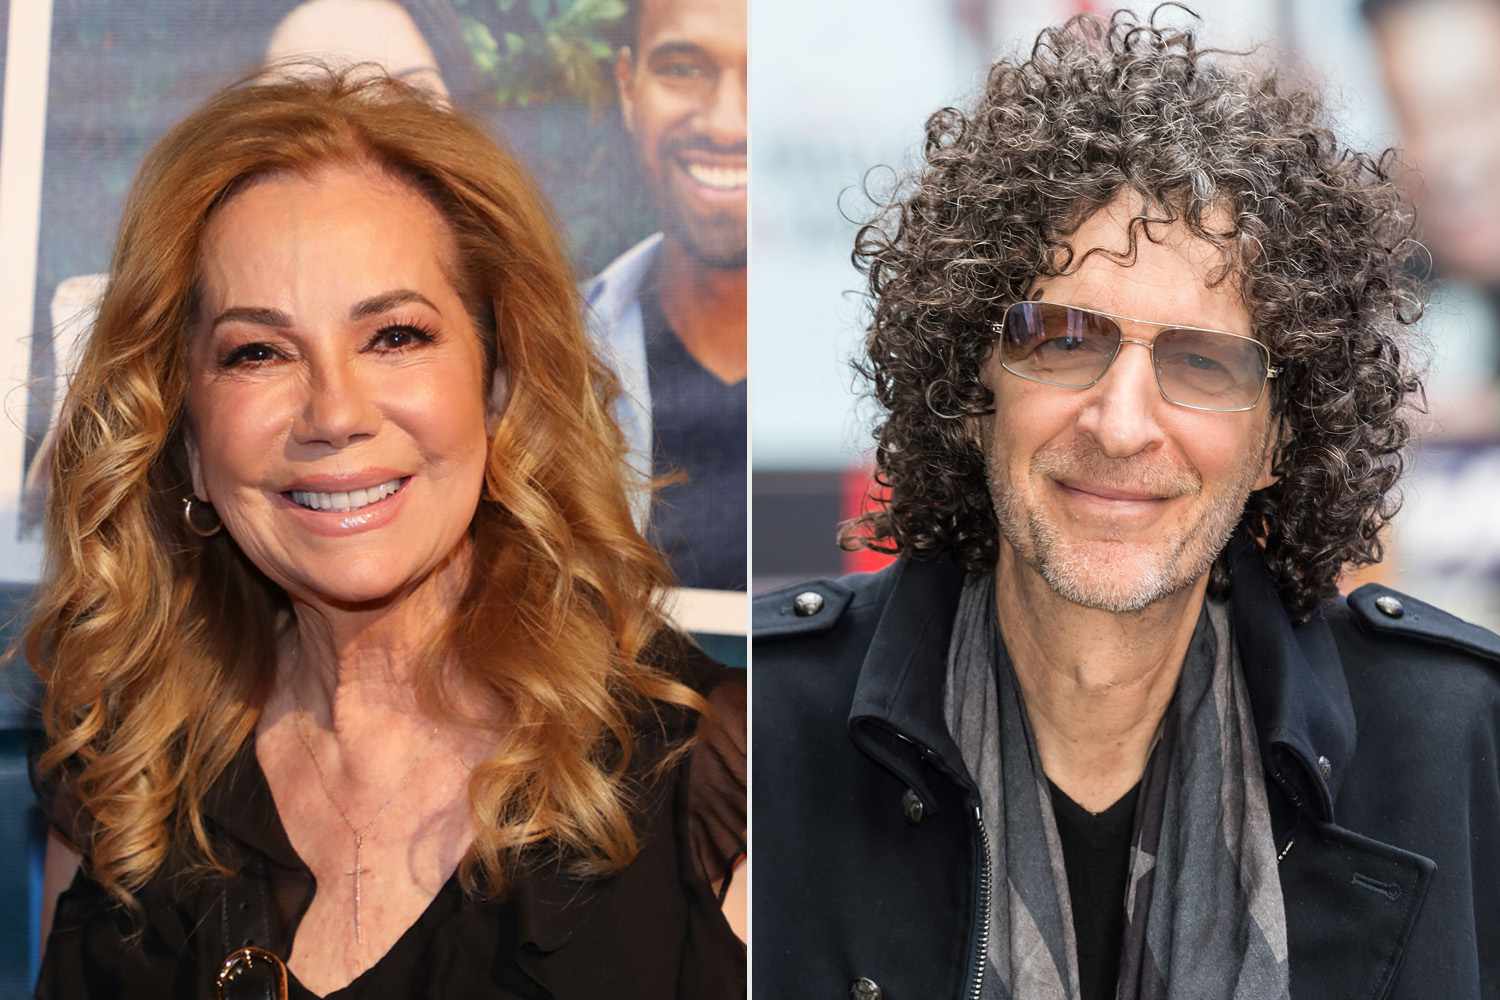 Kathie Lee Gifford Says Past Feud with Howard Stern Ended with a 'Surprise' Voicemail of Him Asking for Forgiveness